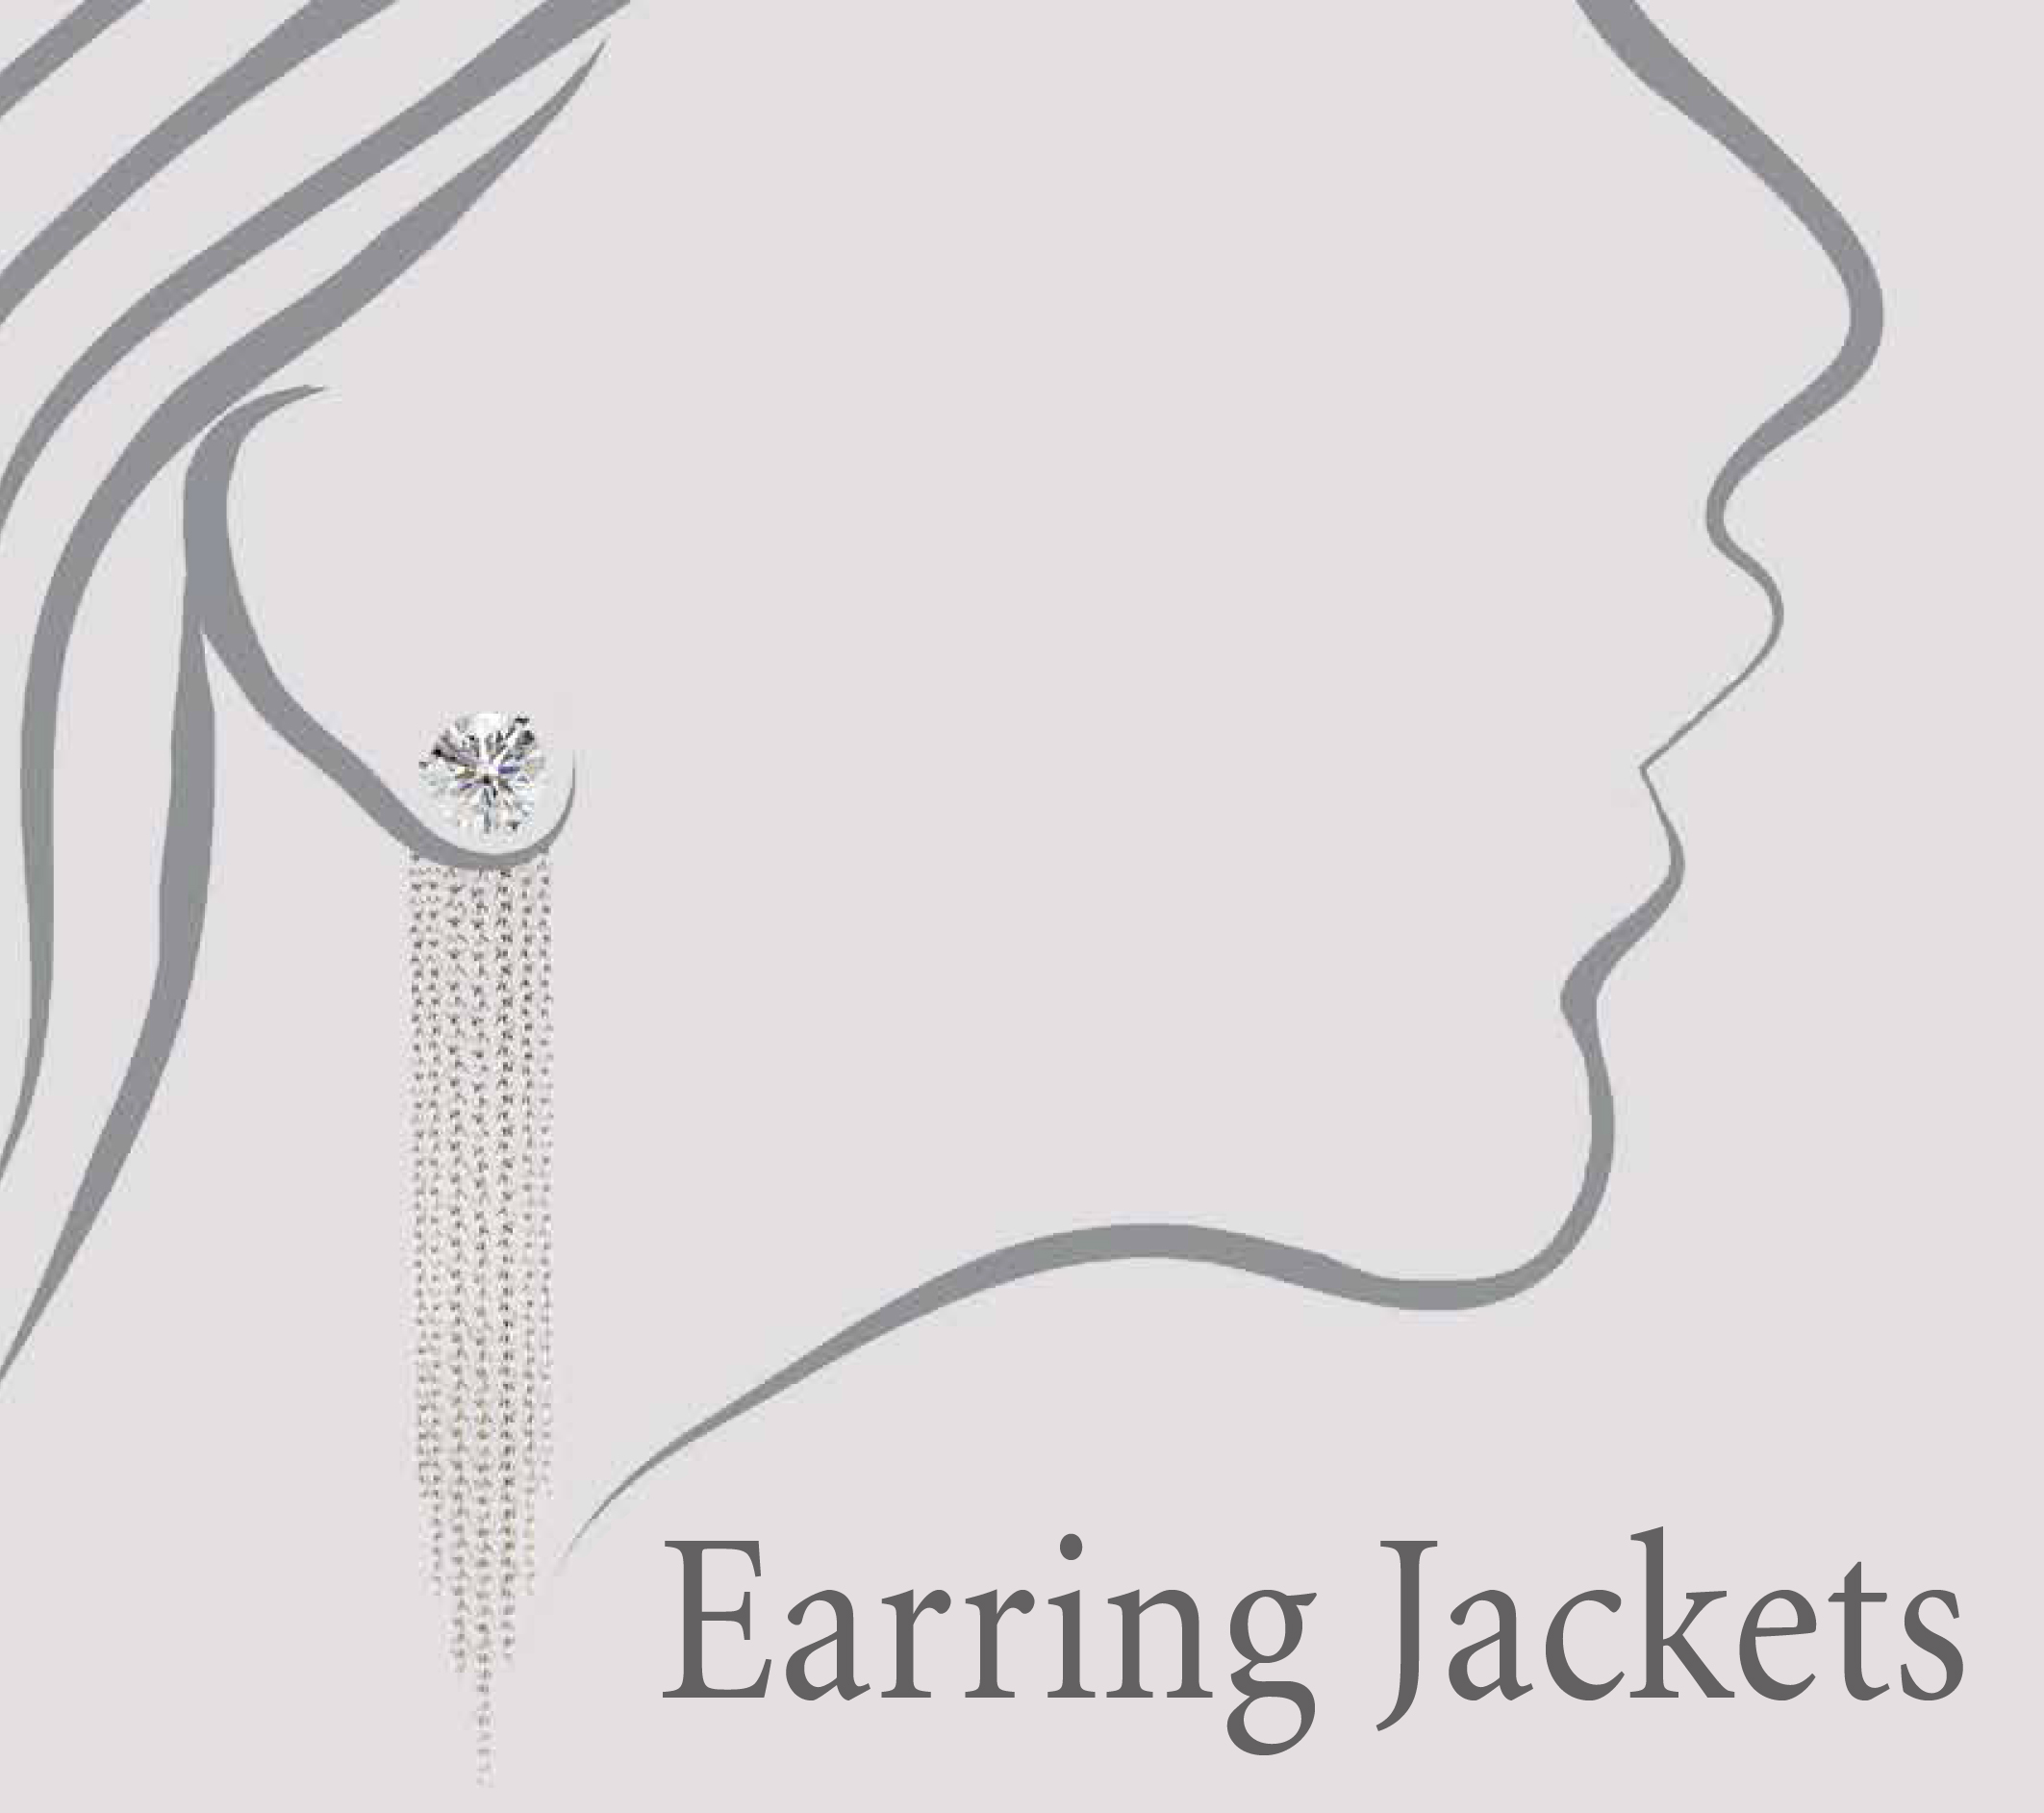 Earring Jackets at Kerns